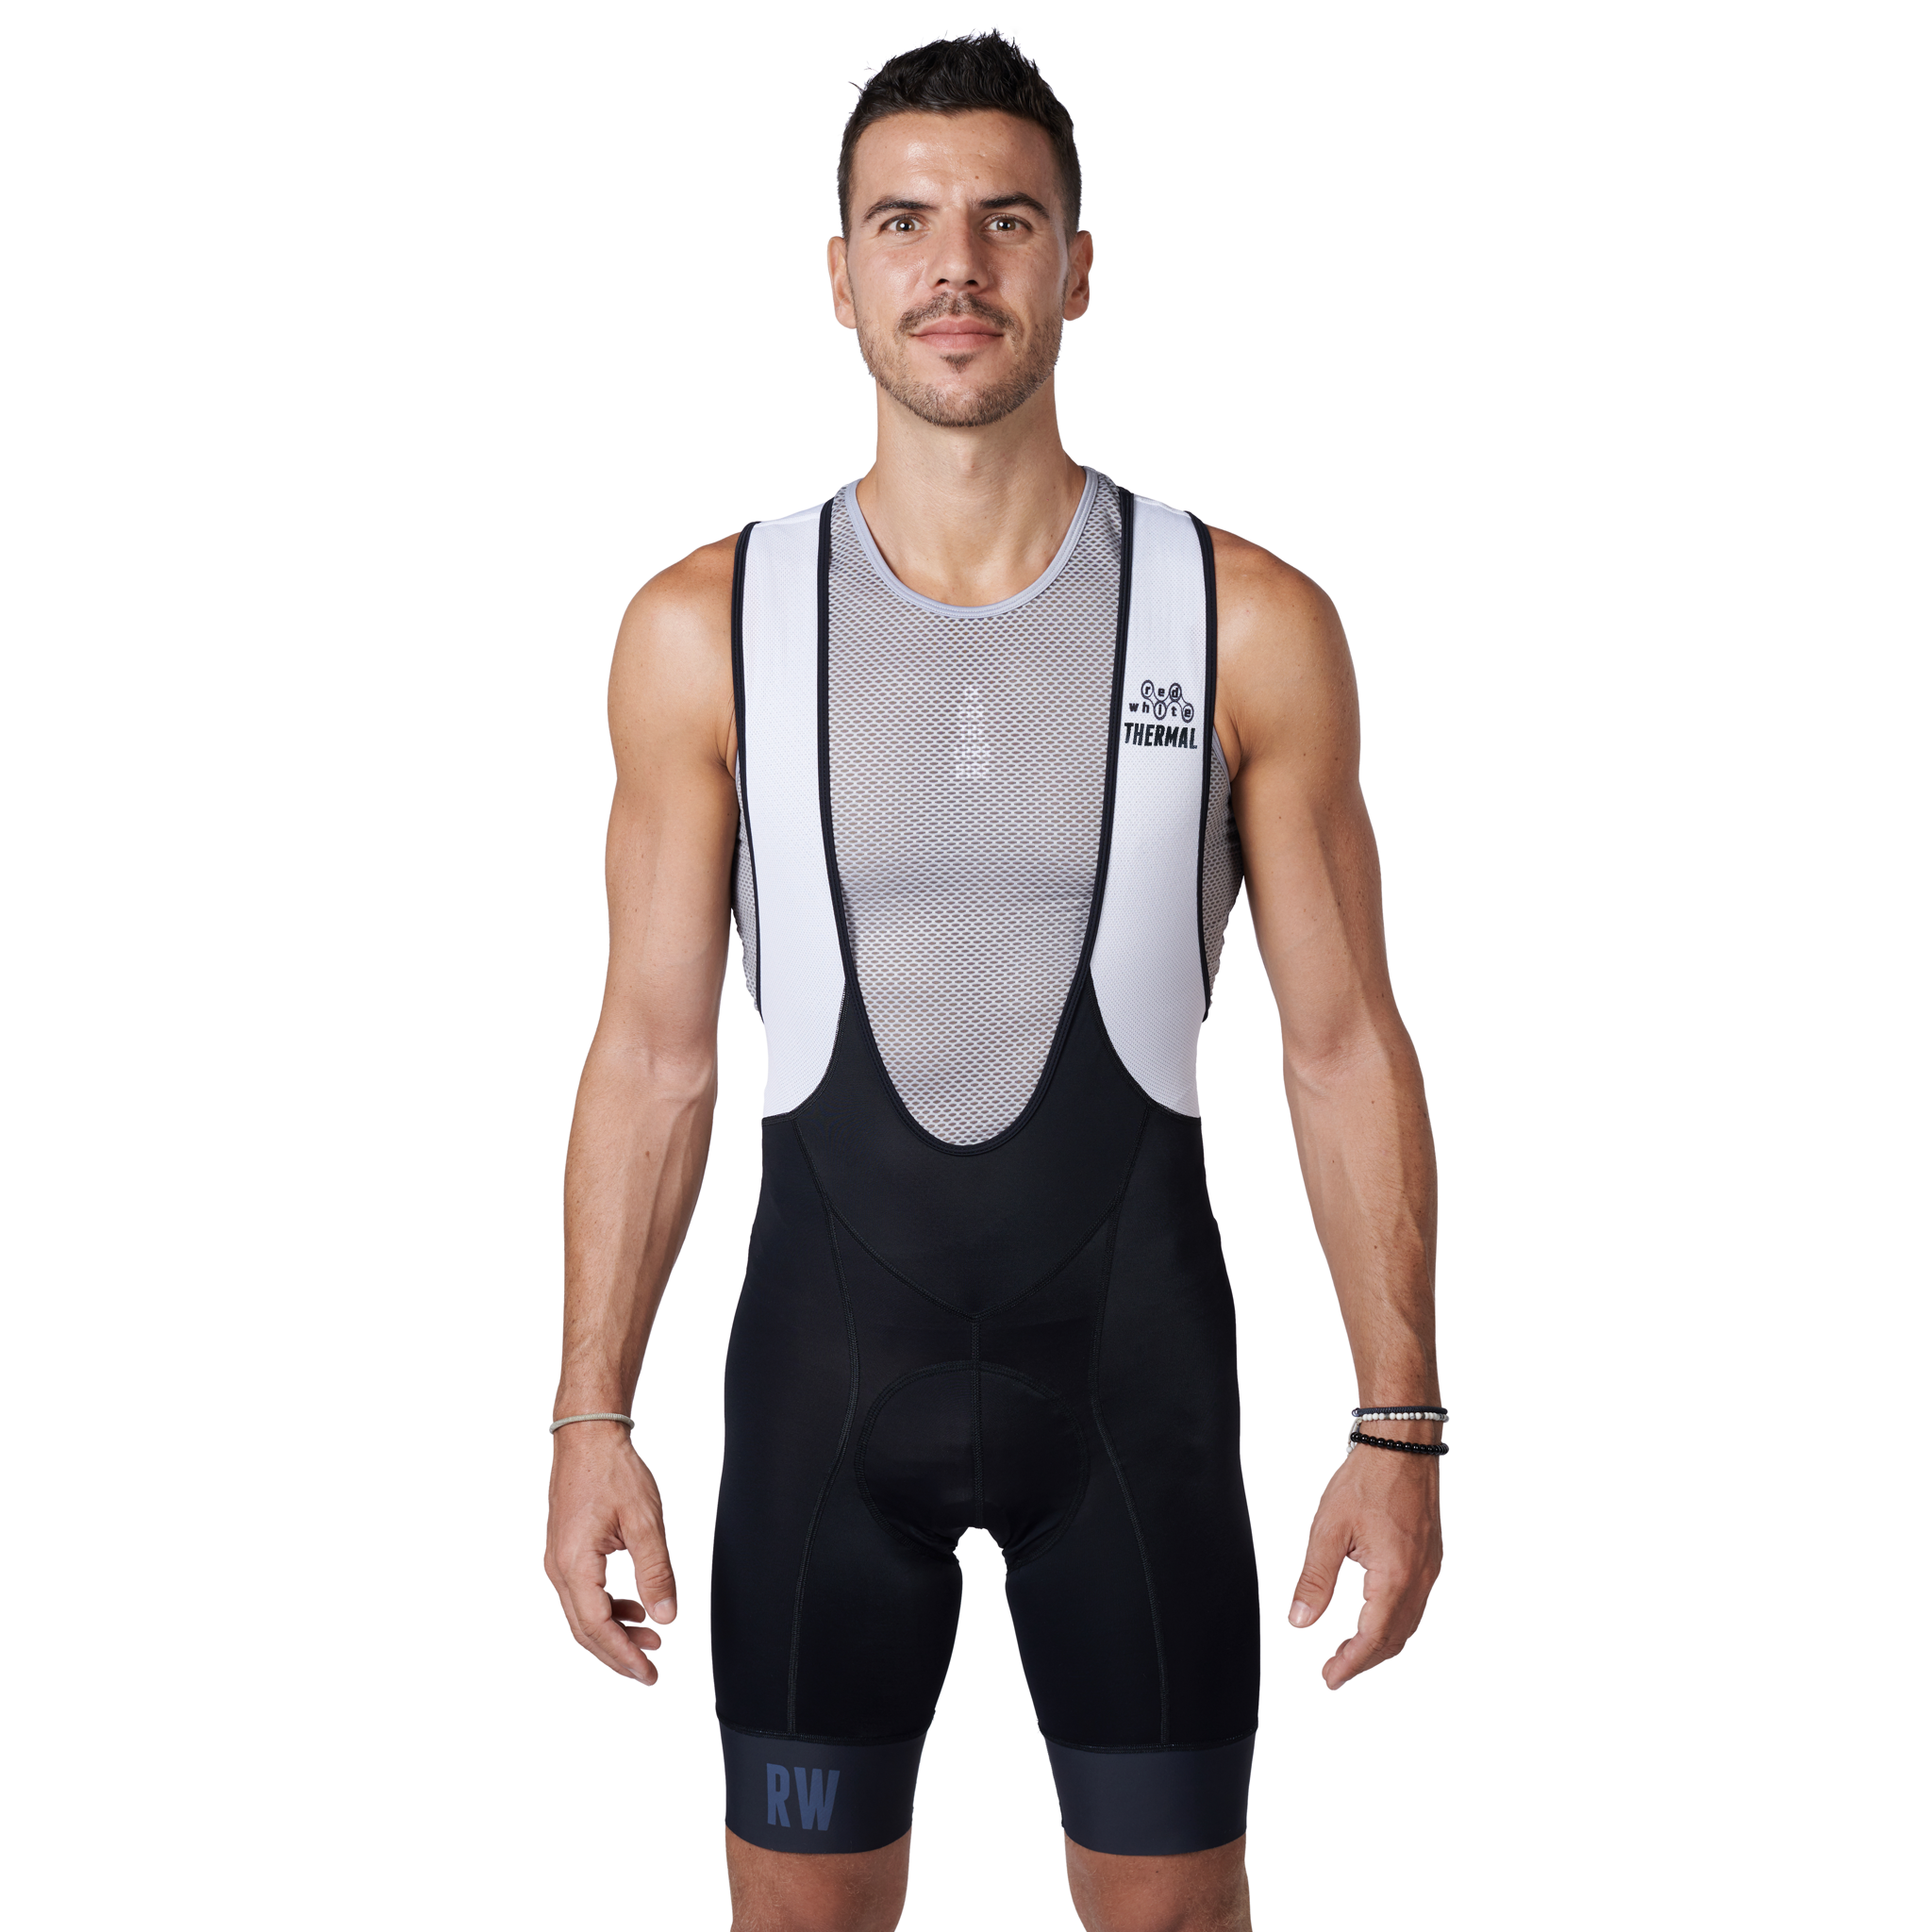 Why The BIB - Thermal Exists – RedWhite Apparel